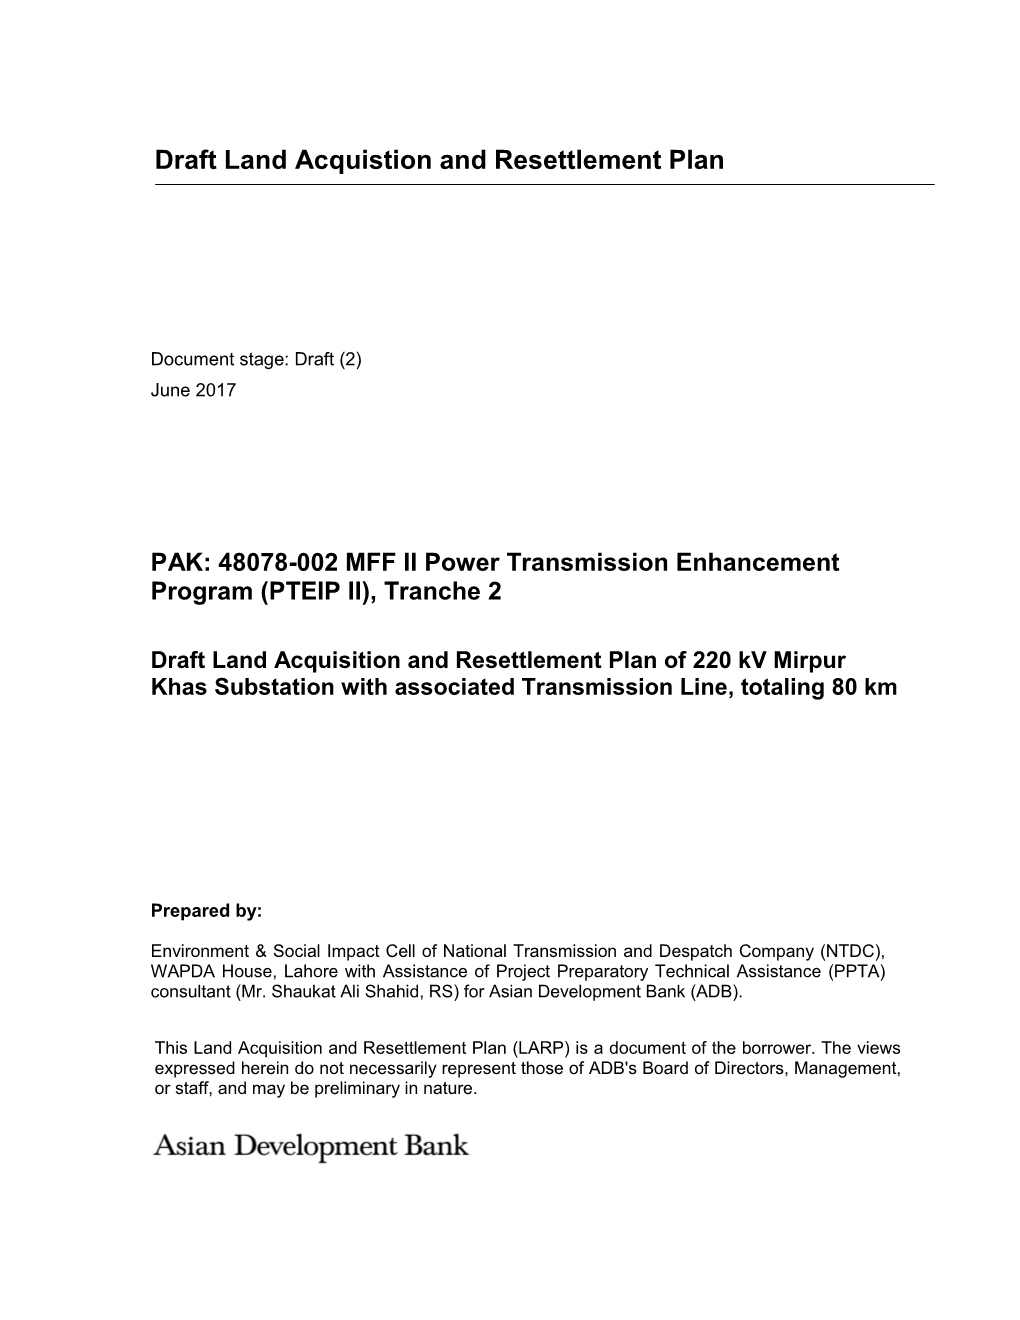 Draft Land Acquistion and Resettlement Plan